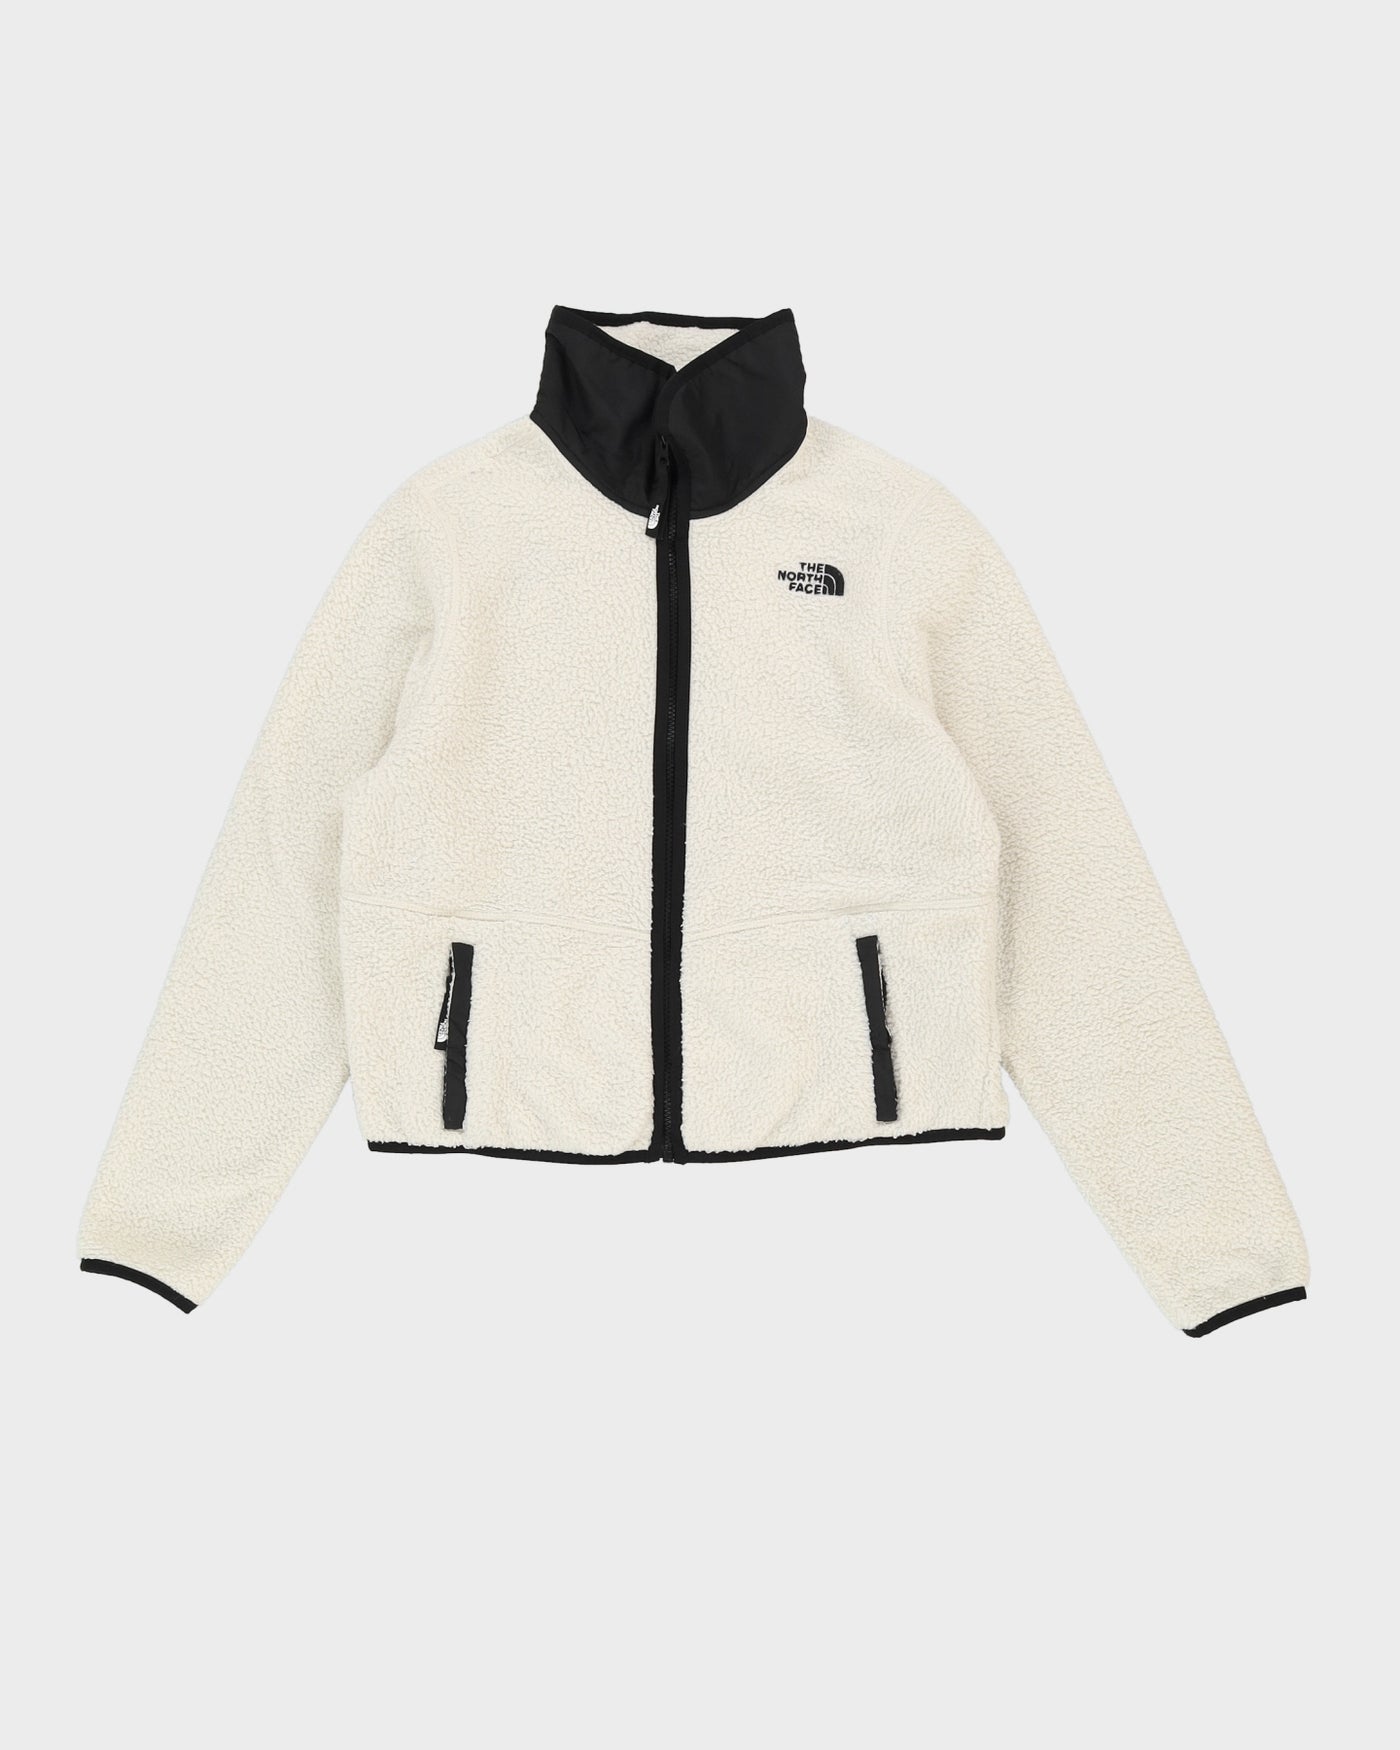 The North Face White Fleece Jacket - S